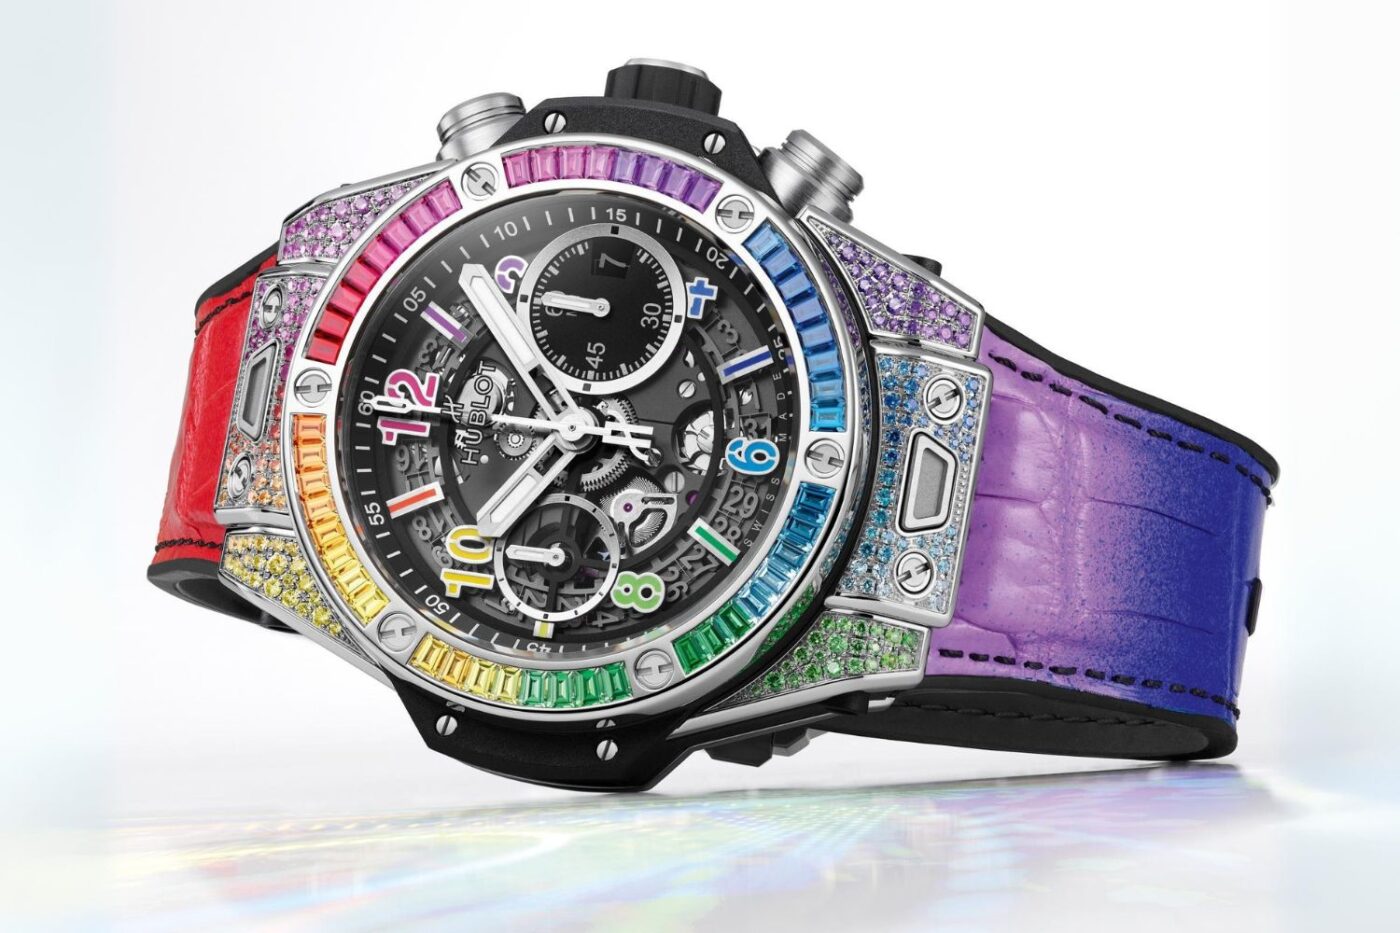 Kylian Mbappé's $100,000 Hublot Big Bang Unico Titanium Rainbow is an insane piece... but we wouldn't expect anything less. 